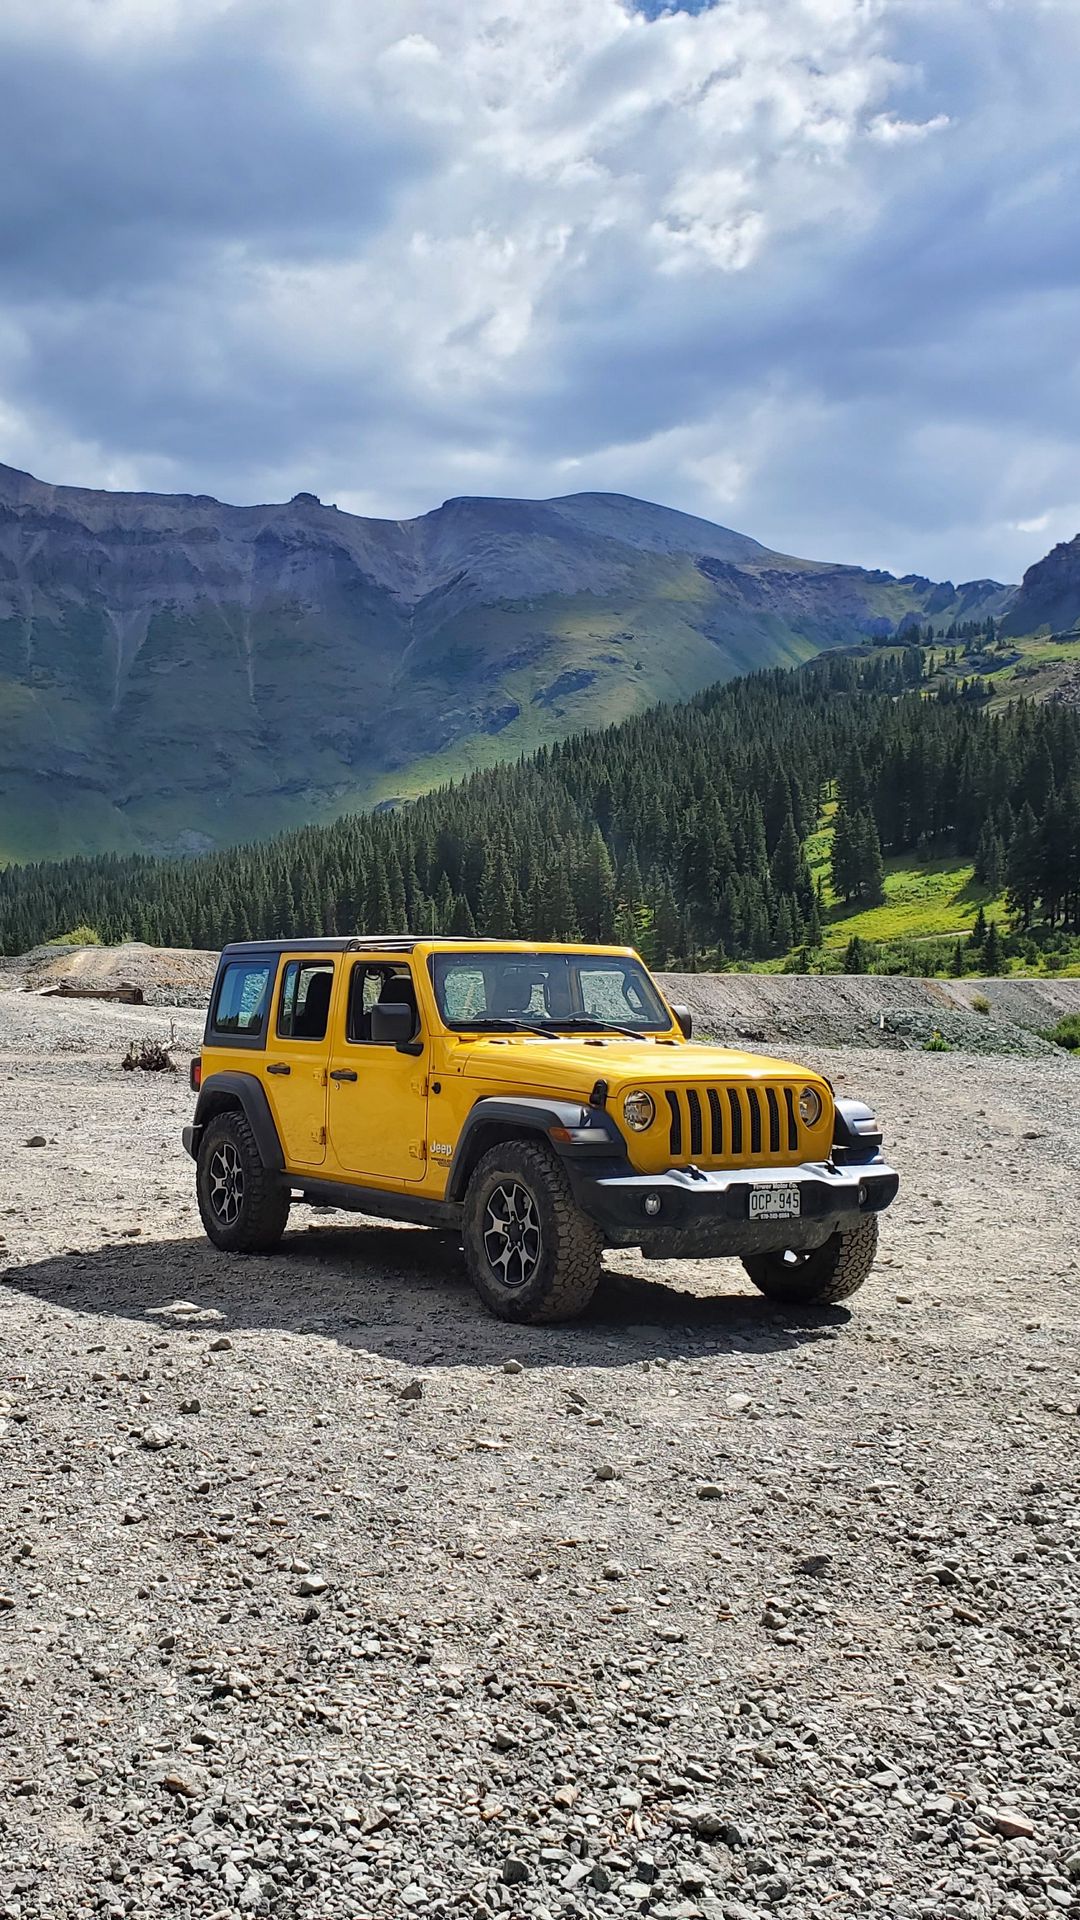 Jeep Photos Download The BEST Free Jeep Stock Photos  HD Images